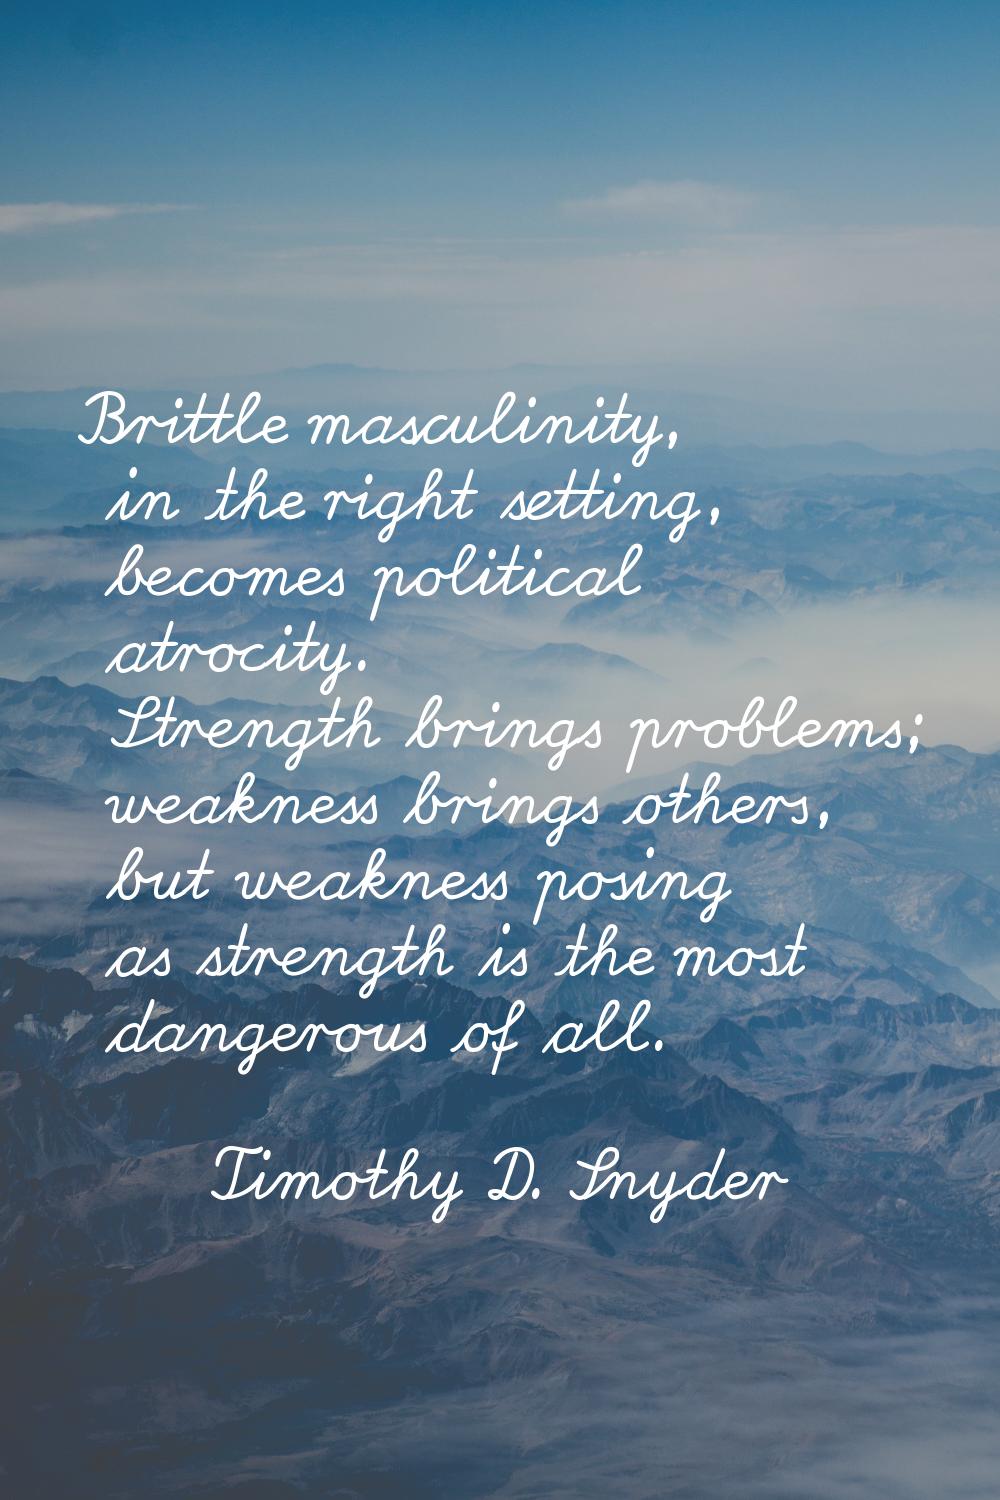 Brittle masculinity, in the right setting, becomes political atrocity. Strength brings problems; we